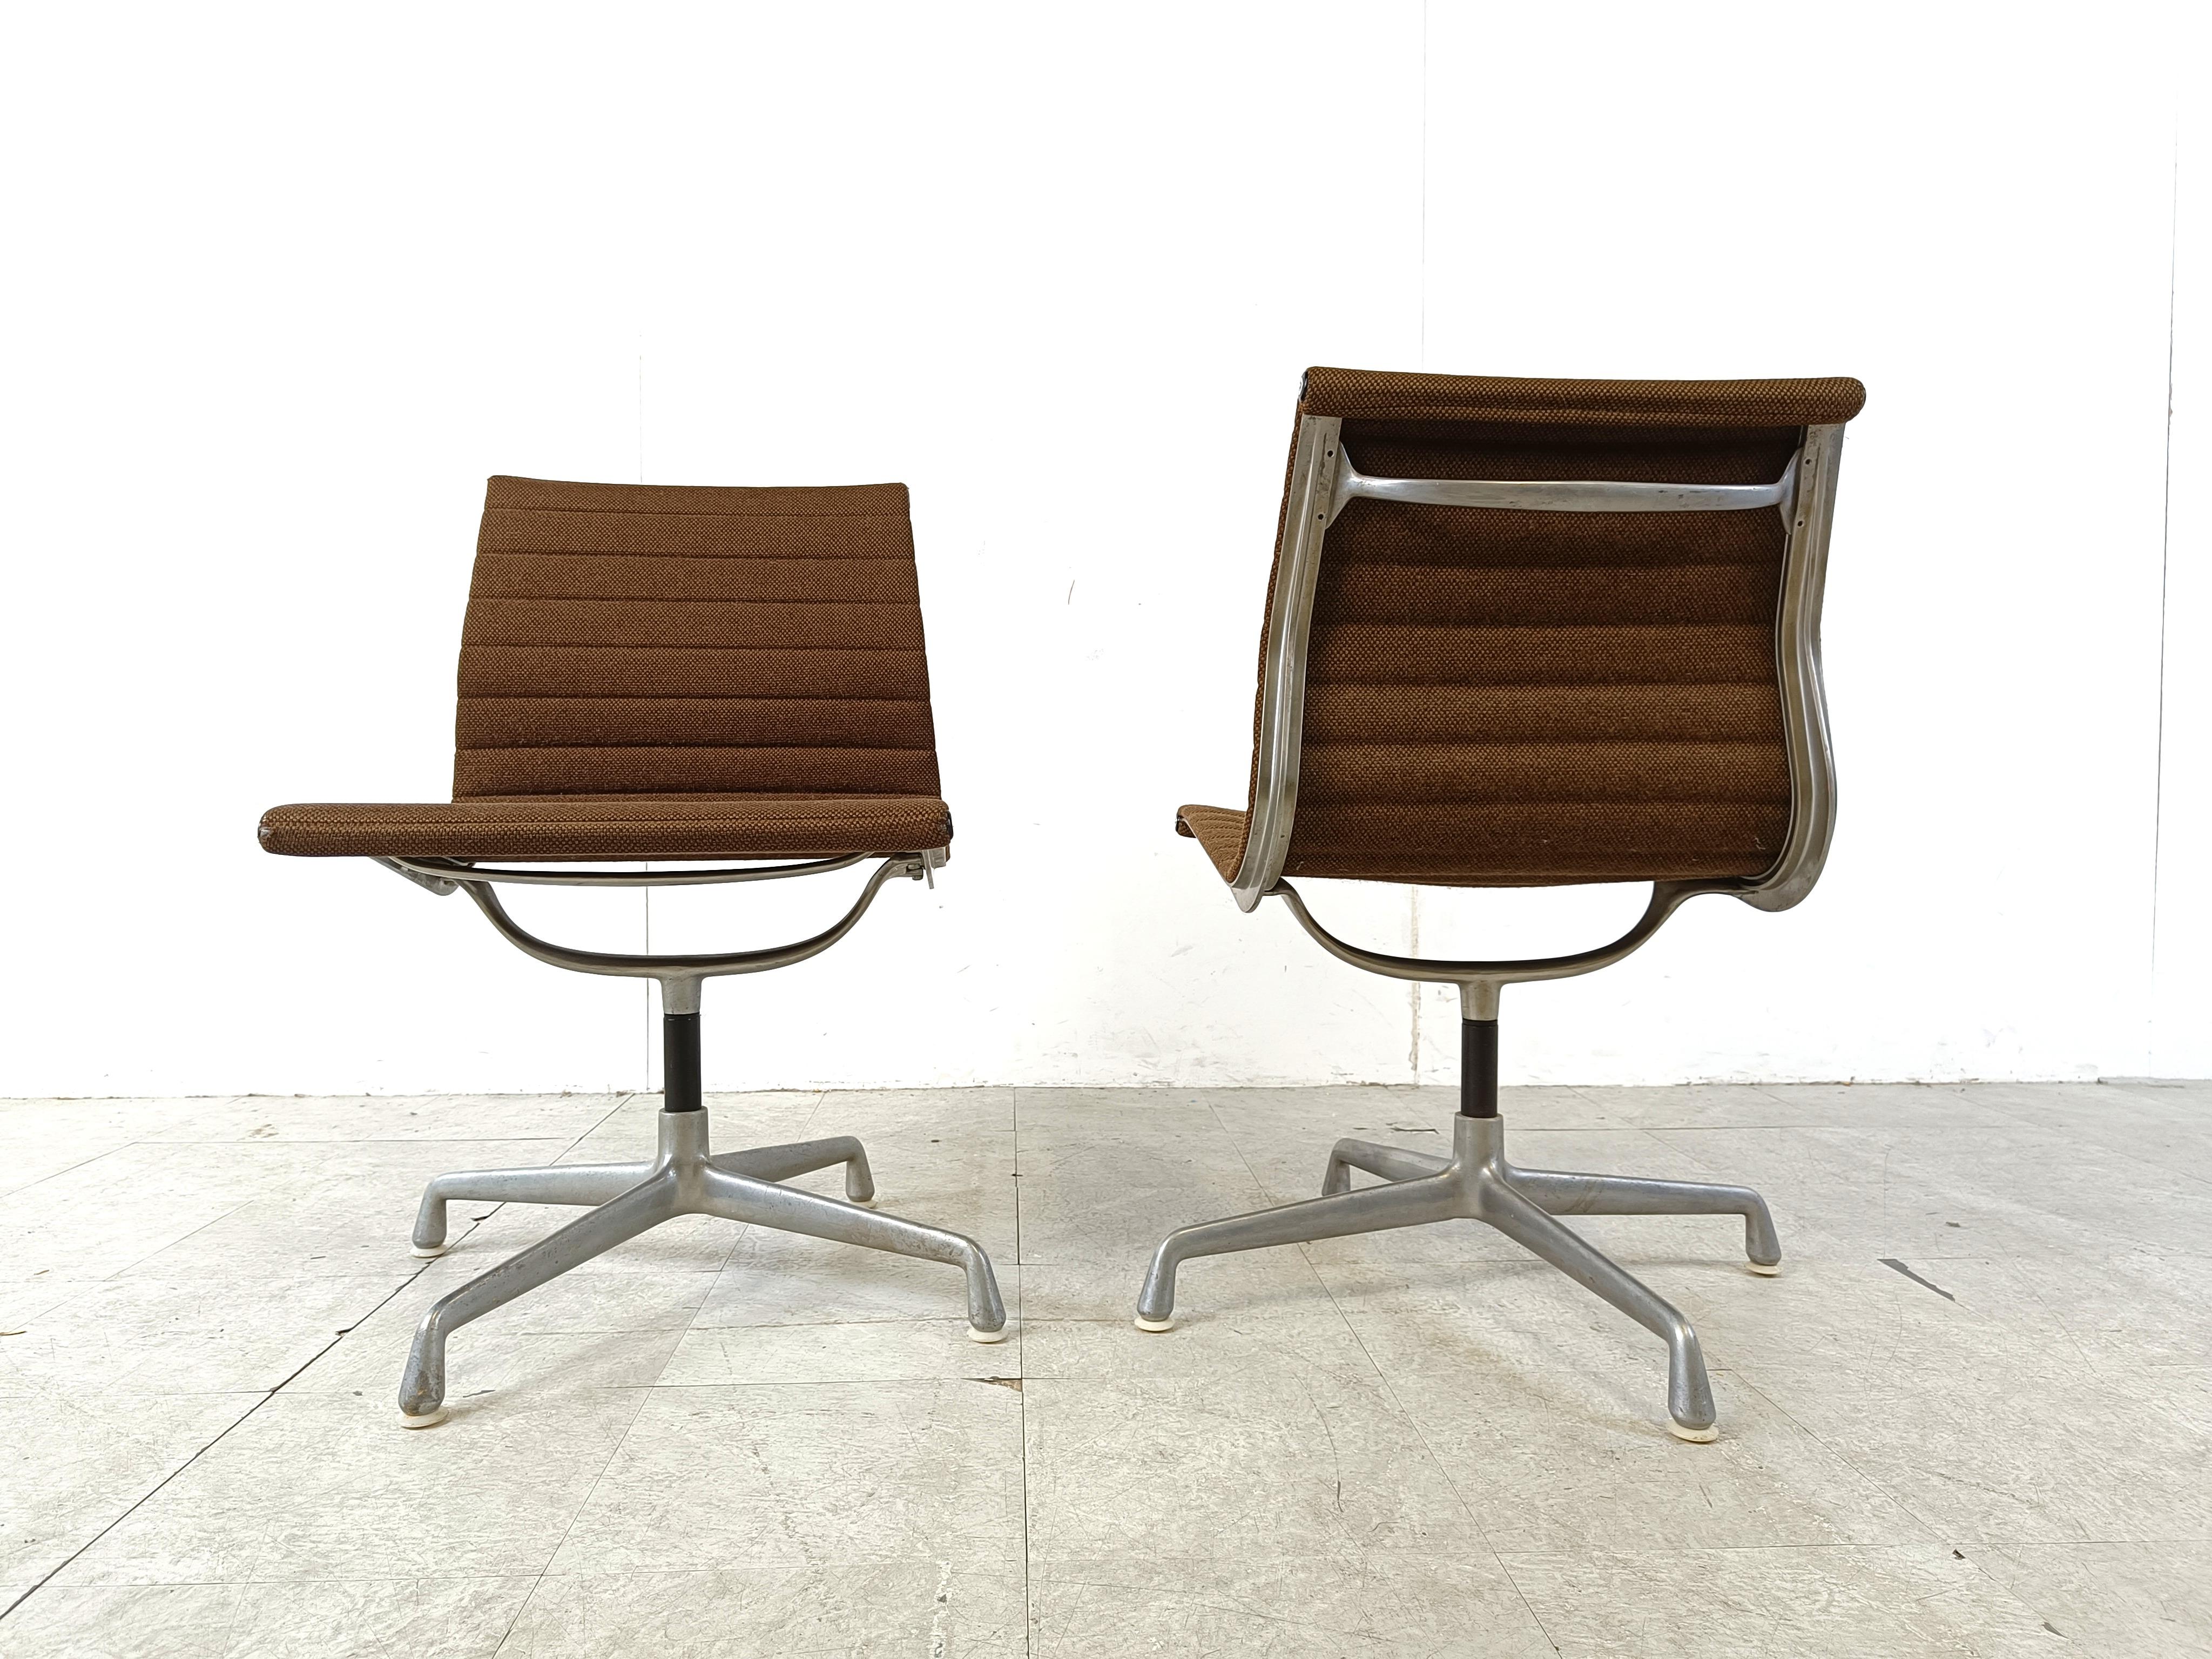 Late 20th Century Vintage eames desk chairs EA108 for herman miller, 1970s - set of 2 For Sale